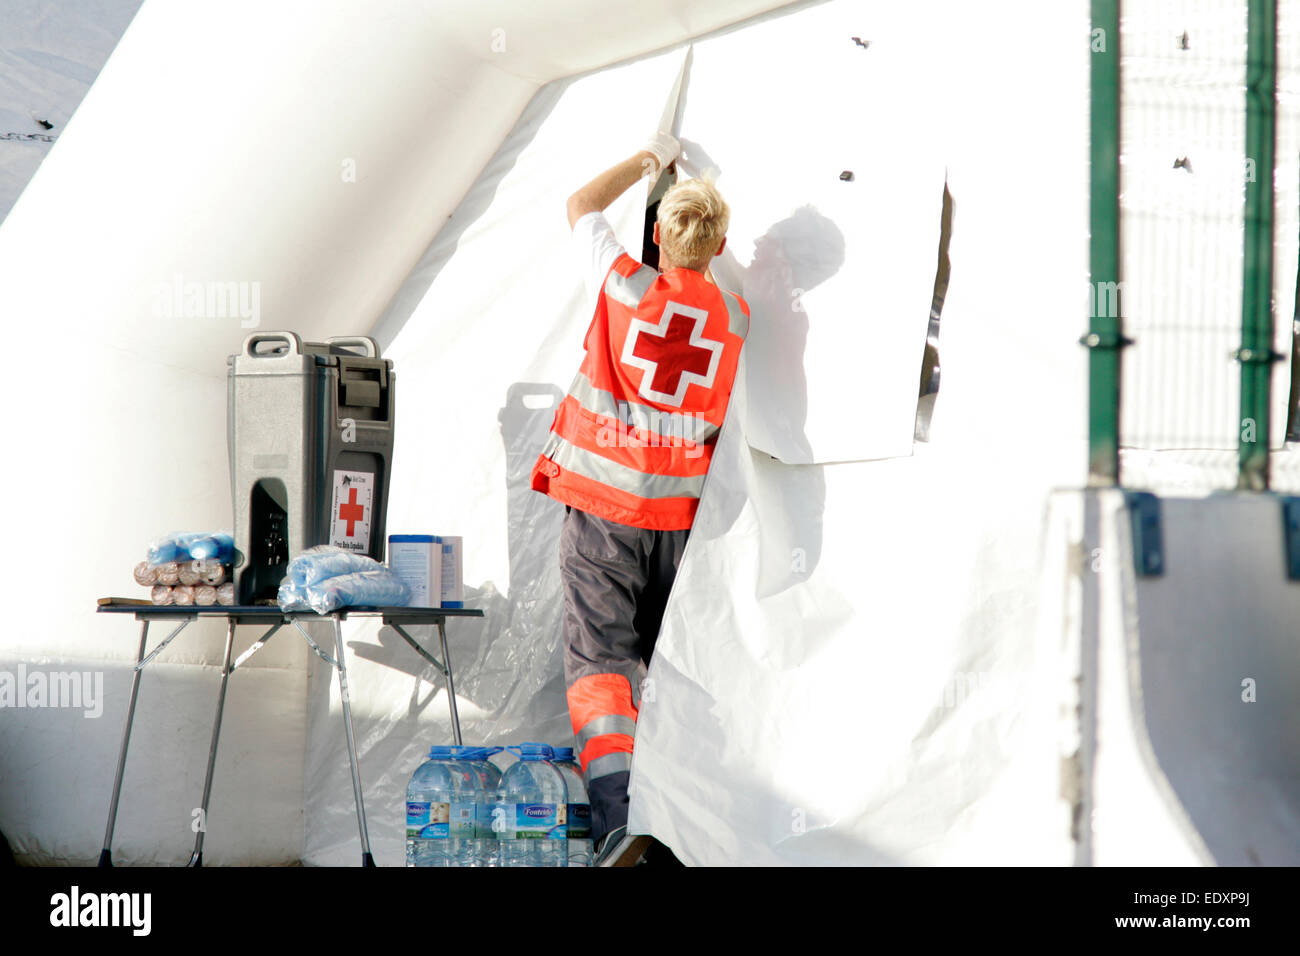 spanish red cross worker closes up inflatable aid quarantine area used to decontaminate illegal african migrants Stock Photo